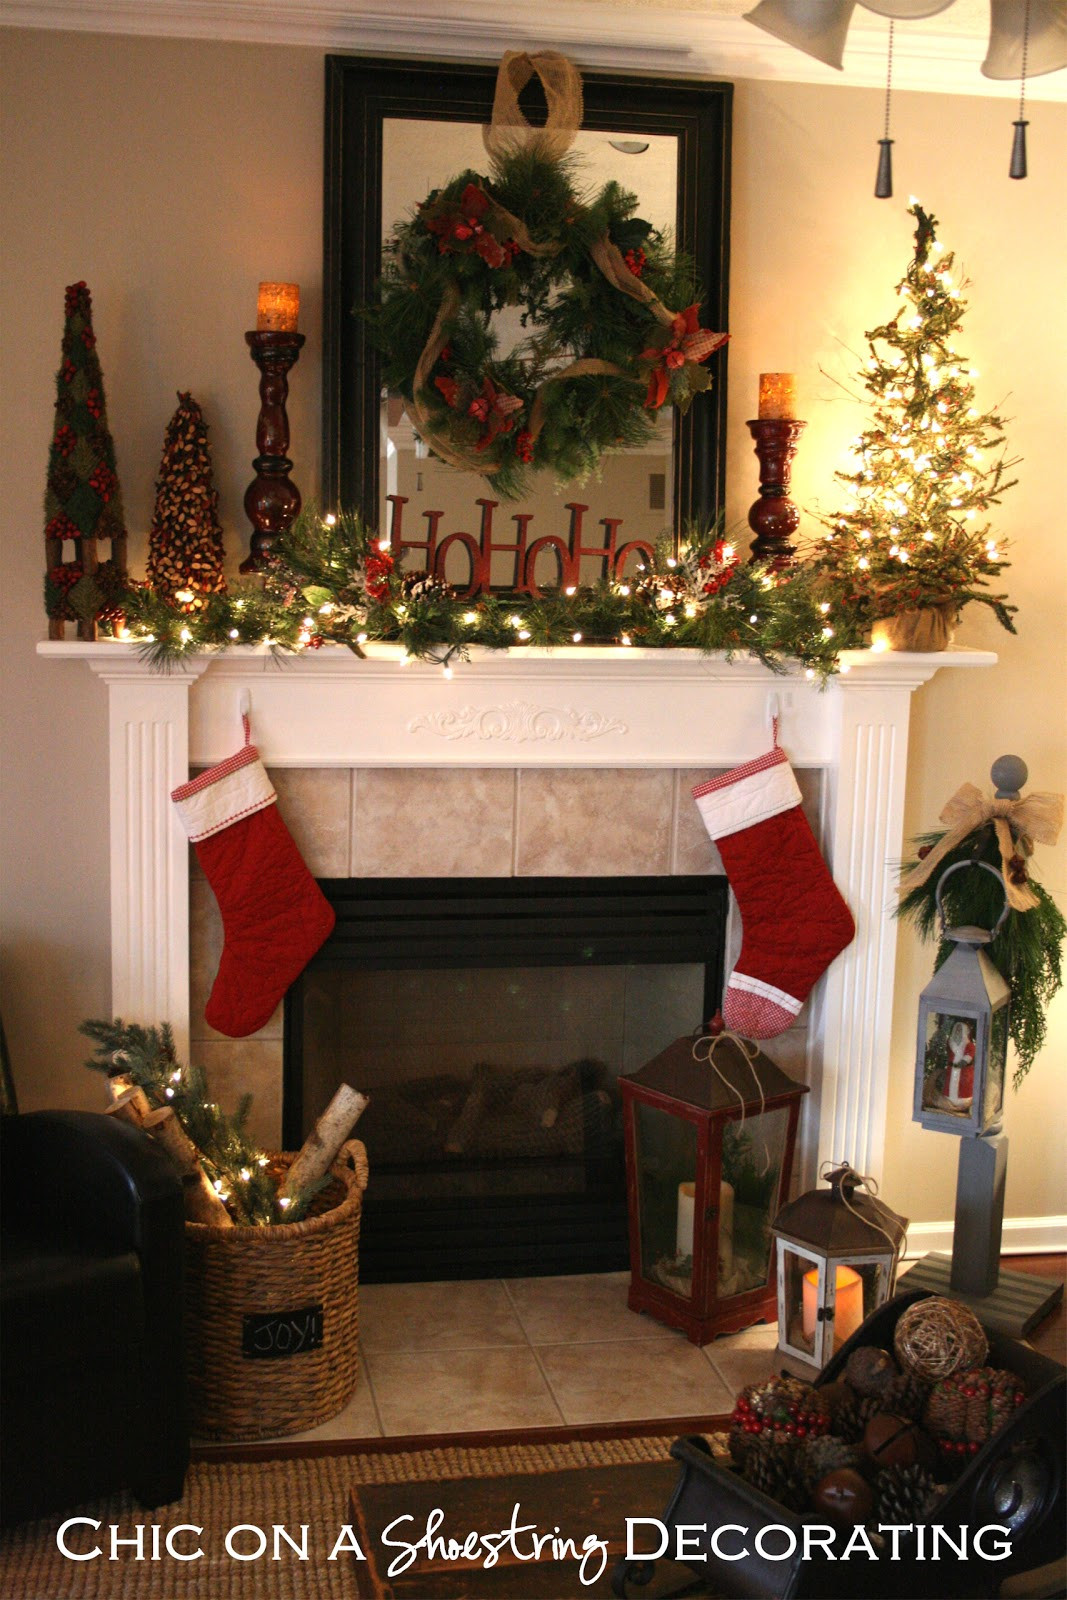 Decorating Fireplace For Christmas
 Chic on a Shoestring Decorating Christmas Home Tour Part